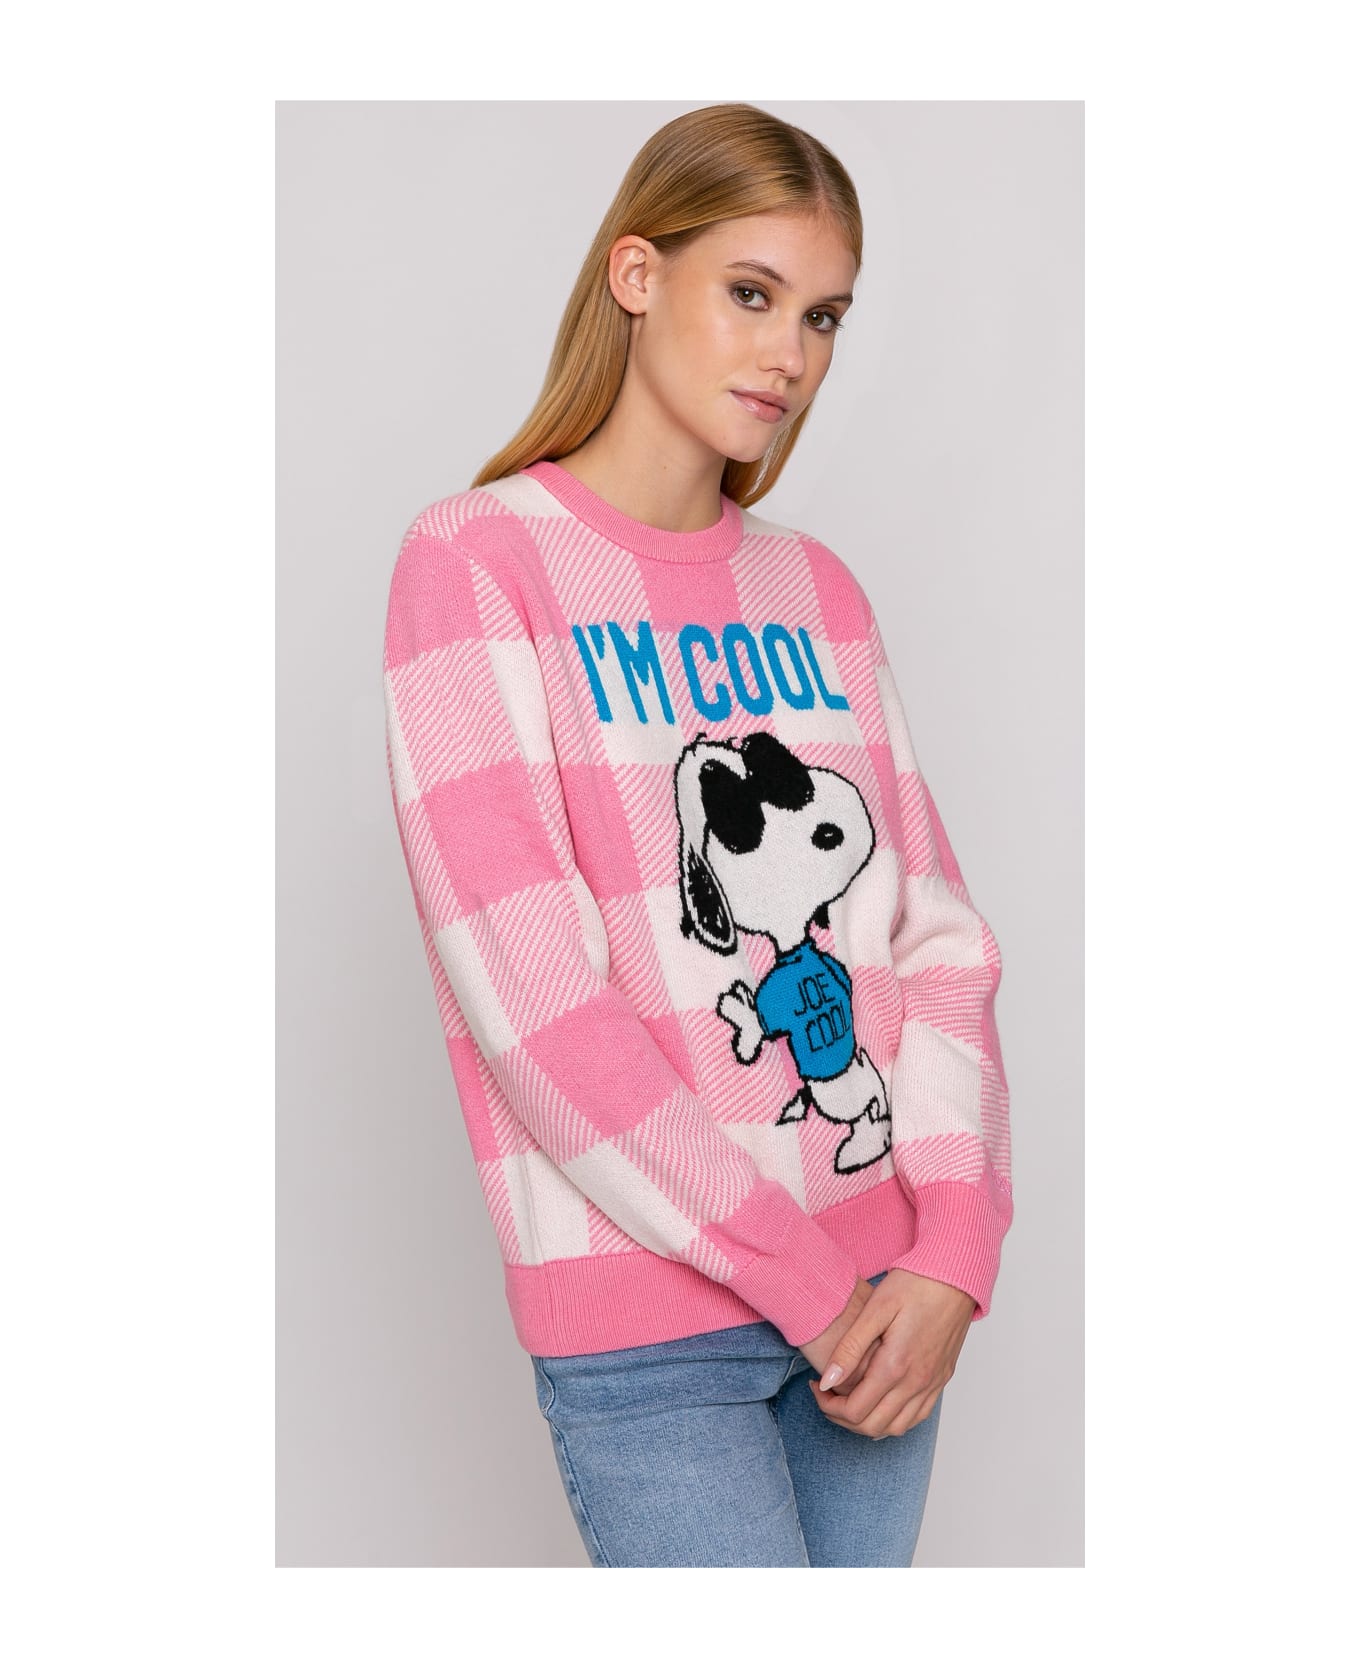 MC2 Saint Barth Woman Sweater With Snoopy I'm Cool Print | Snoopy - Peanuts Special Edition - PINK